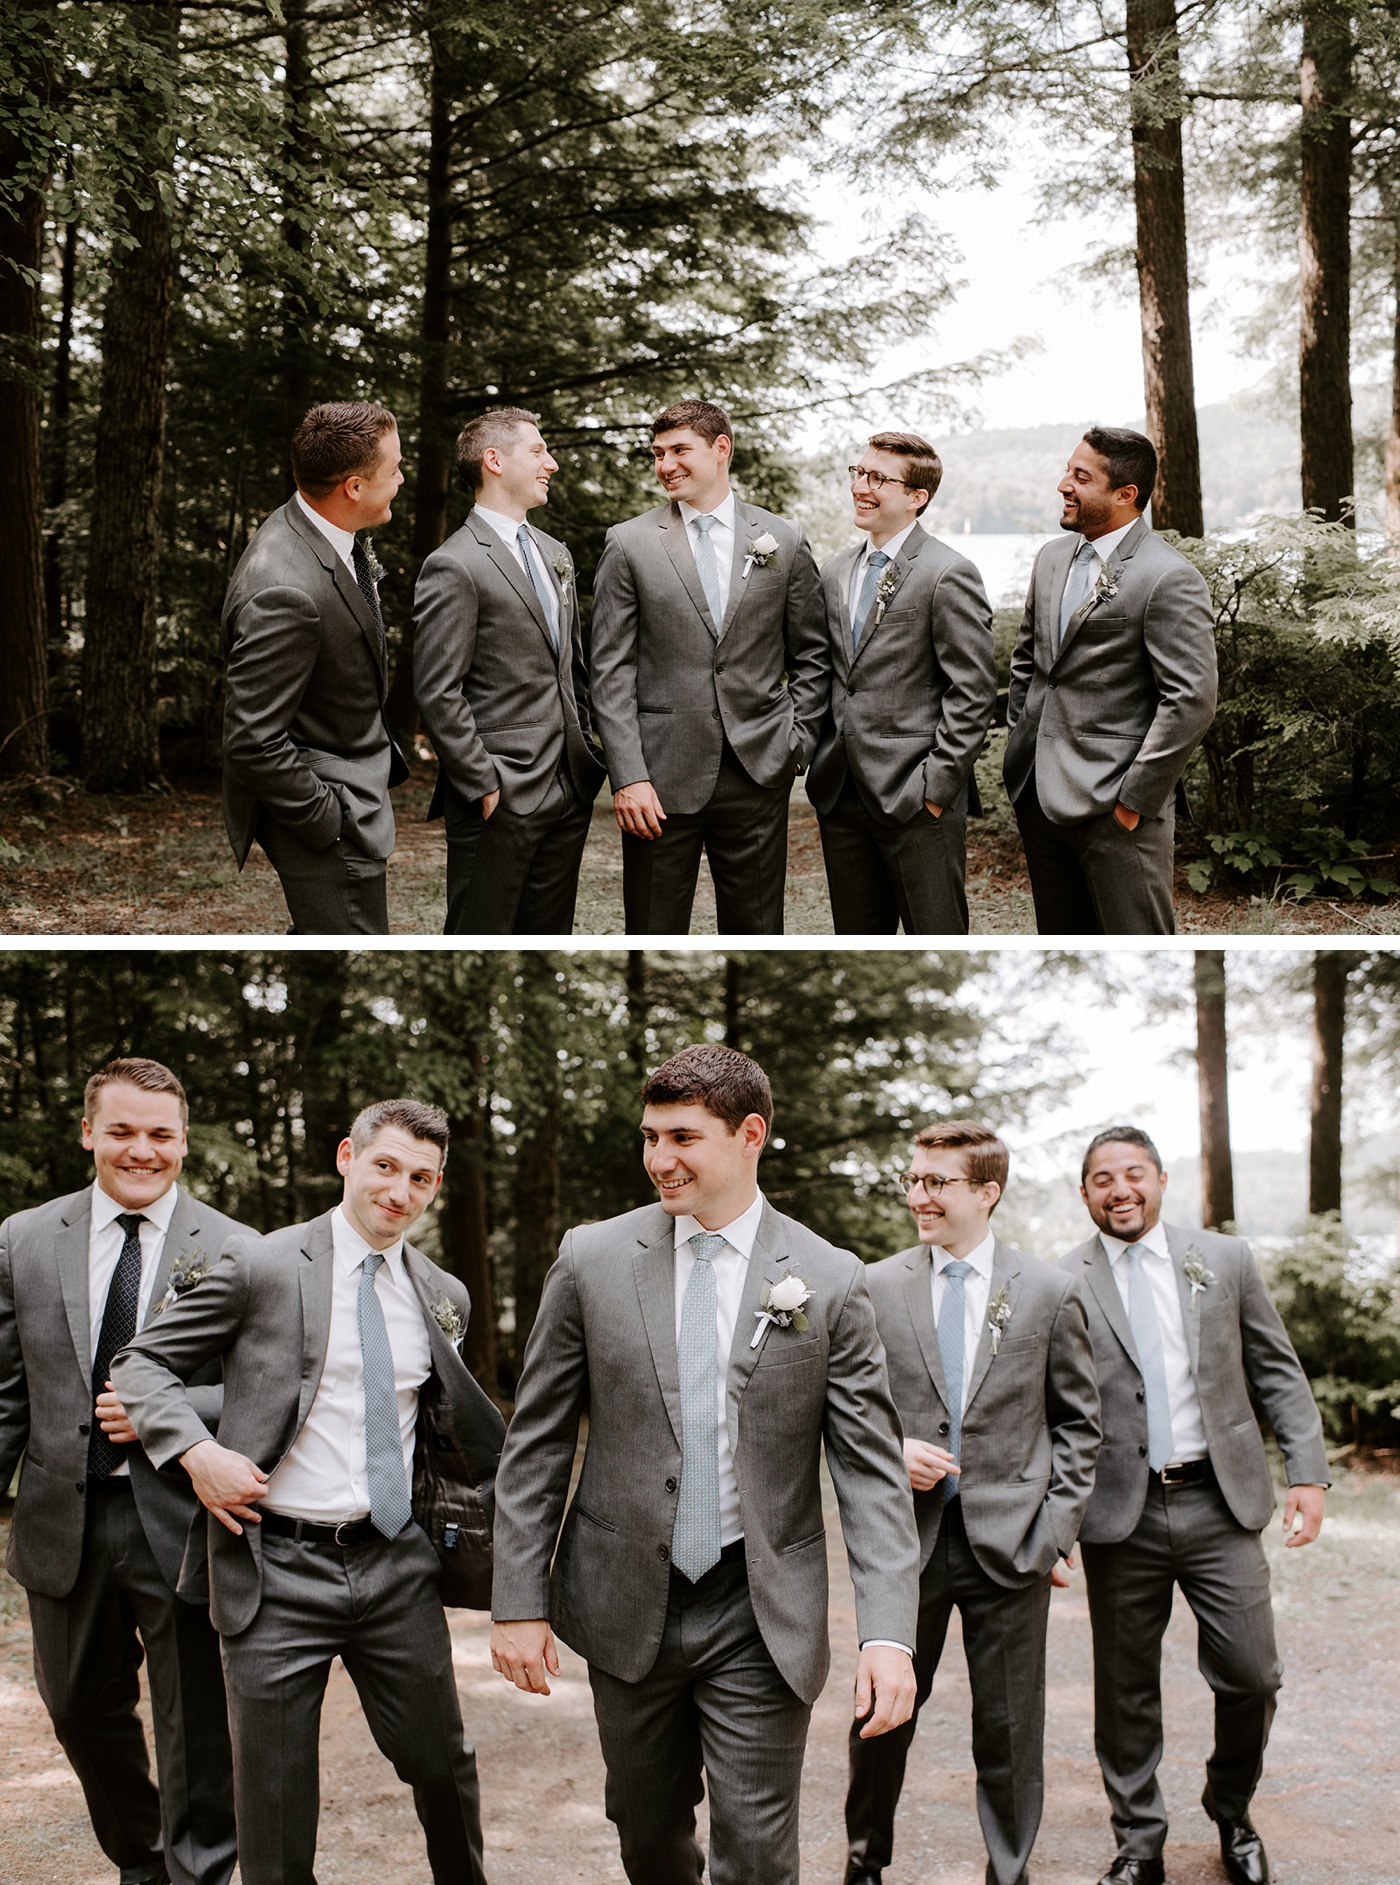 Bridal party portraits at a private lake property in New Hampshire